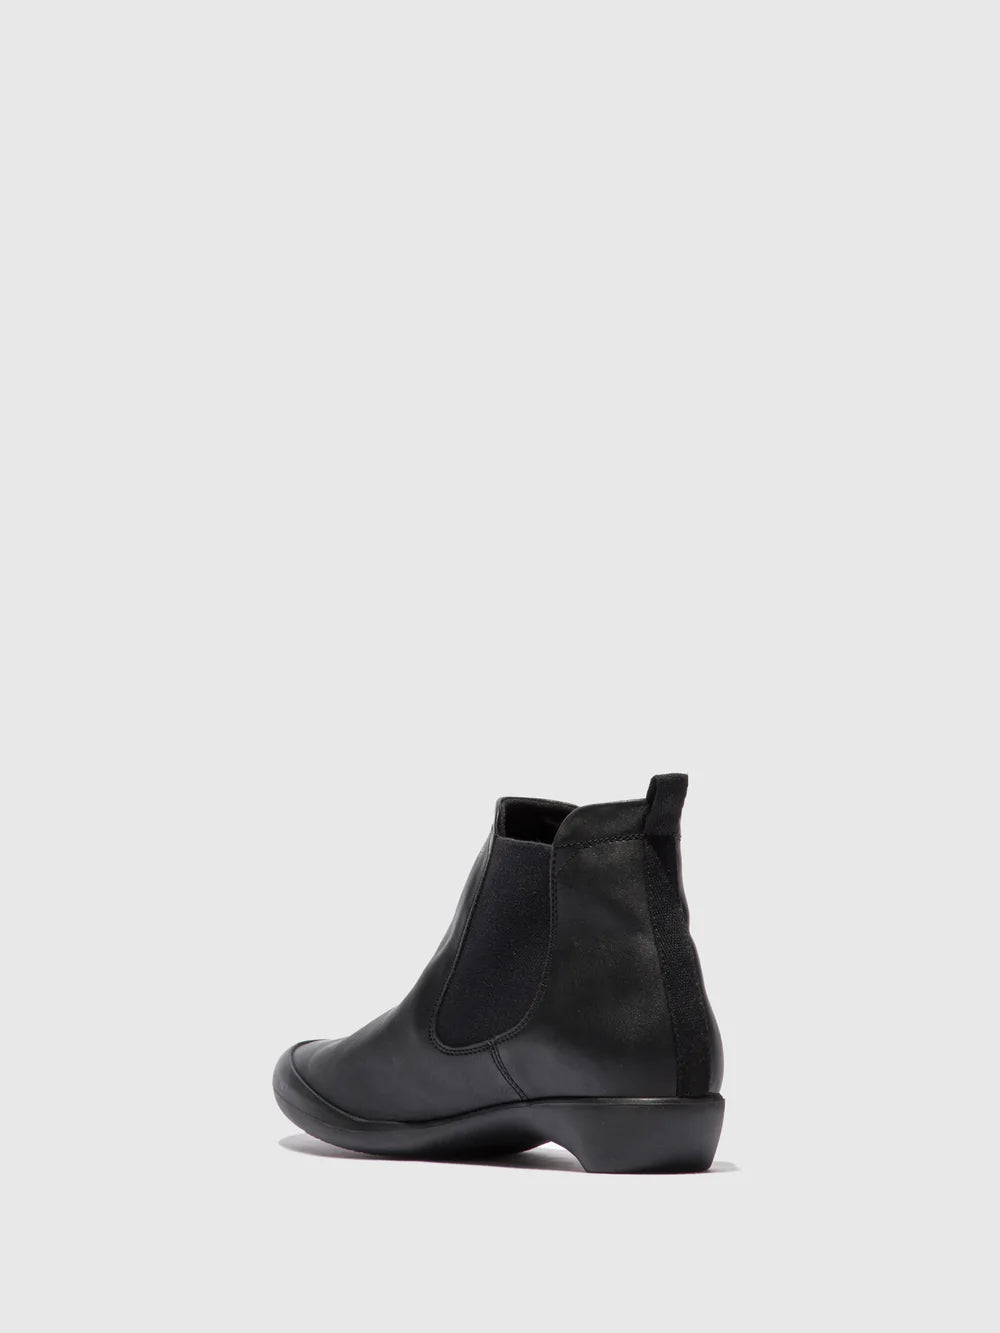 Softinos Fary leather black chelsea boot - Imeldas Shoes Norwich